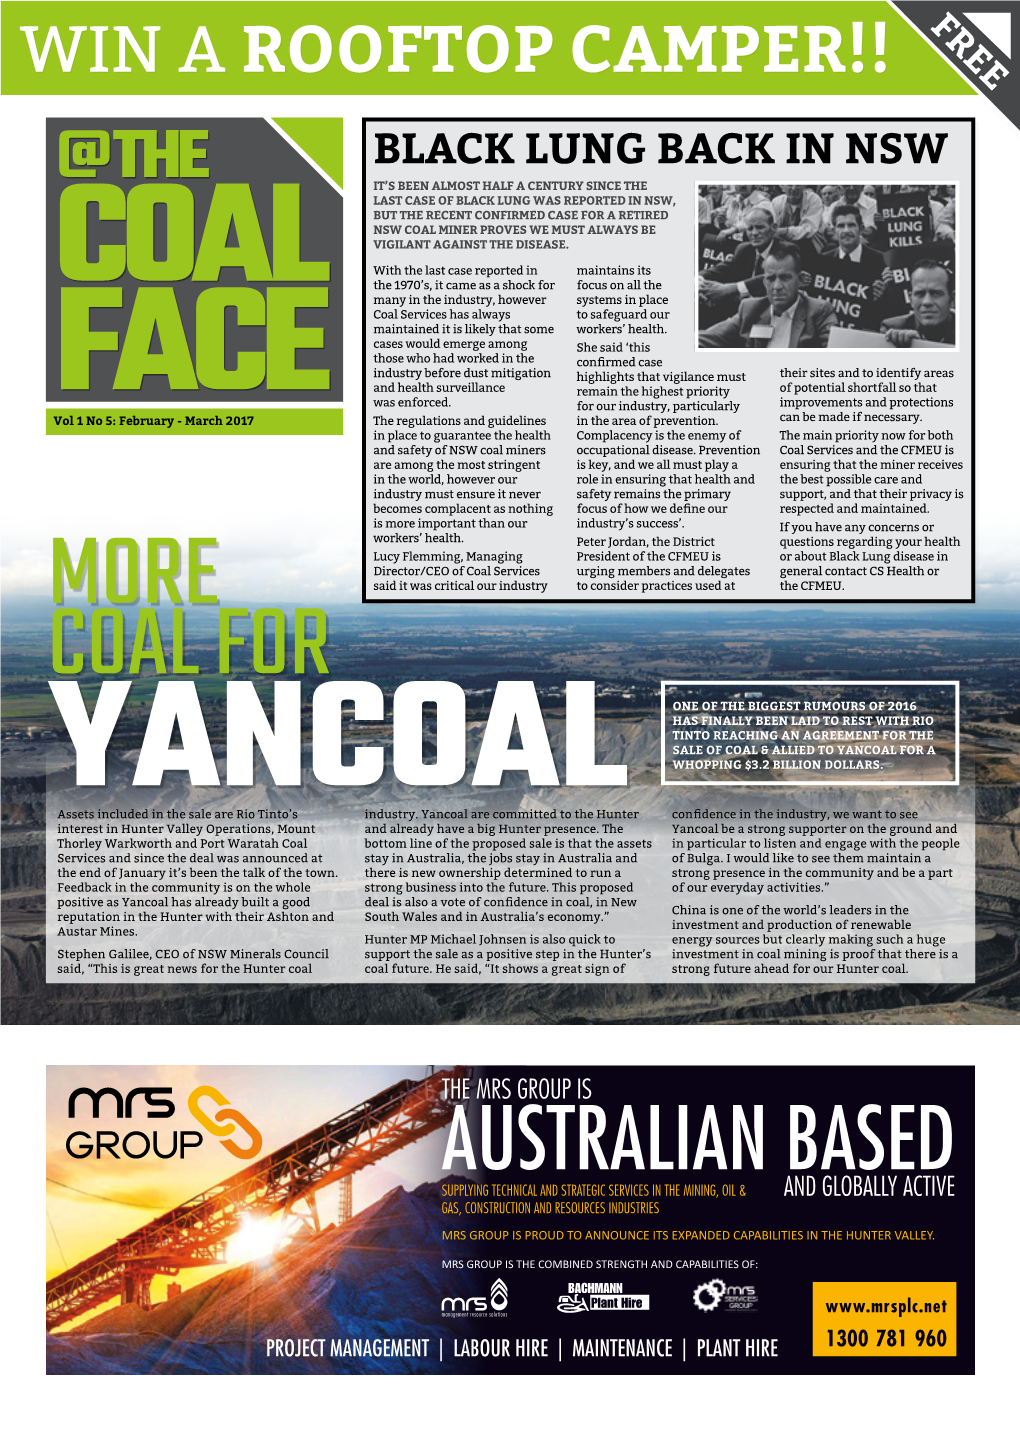 February 2017 Issue of "@ the Coal Face" Magazine